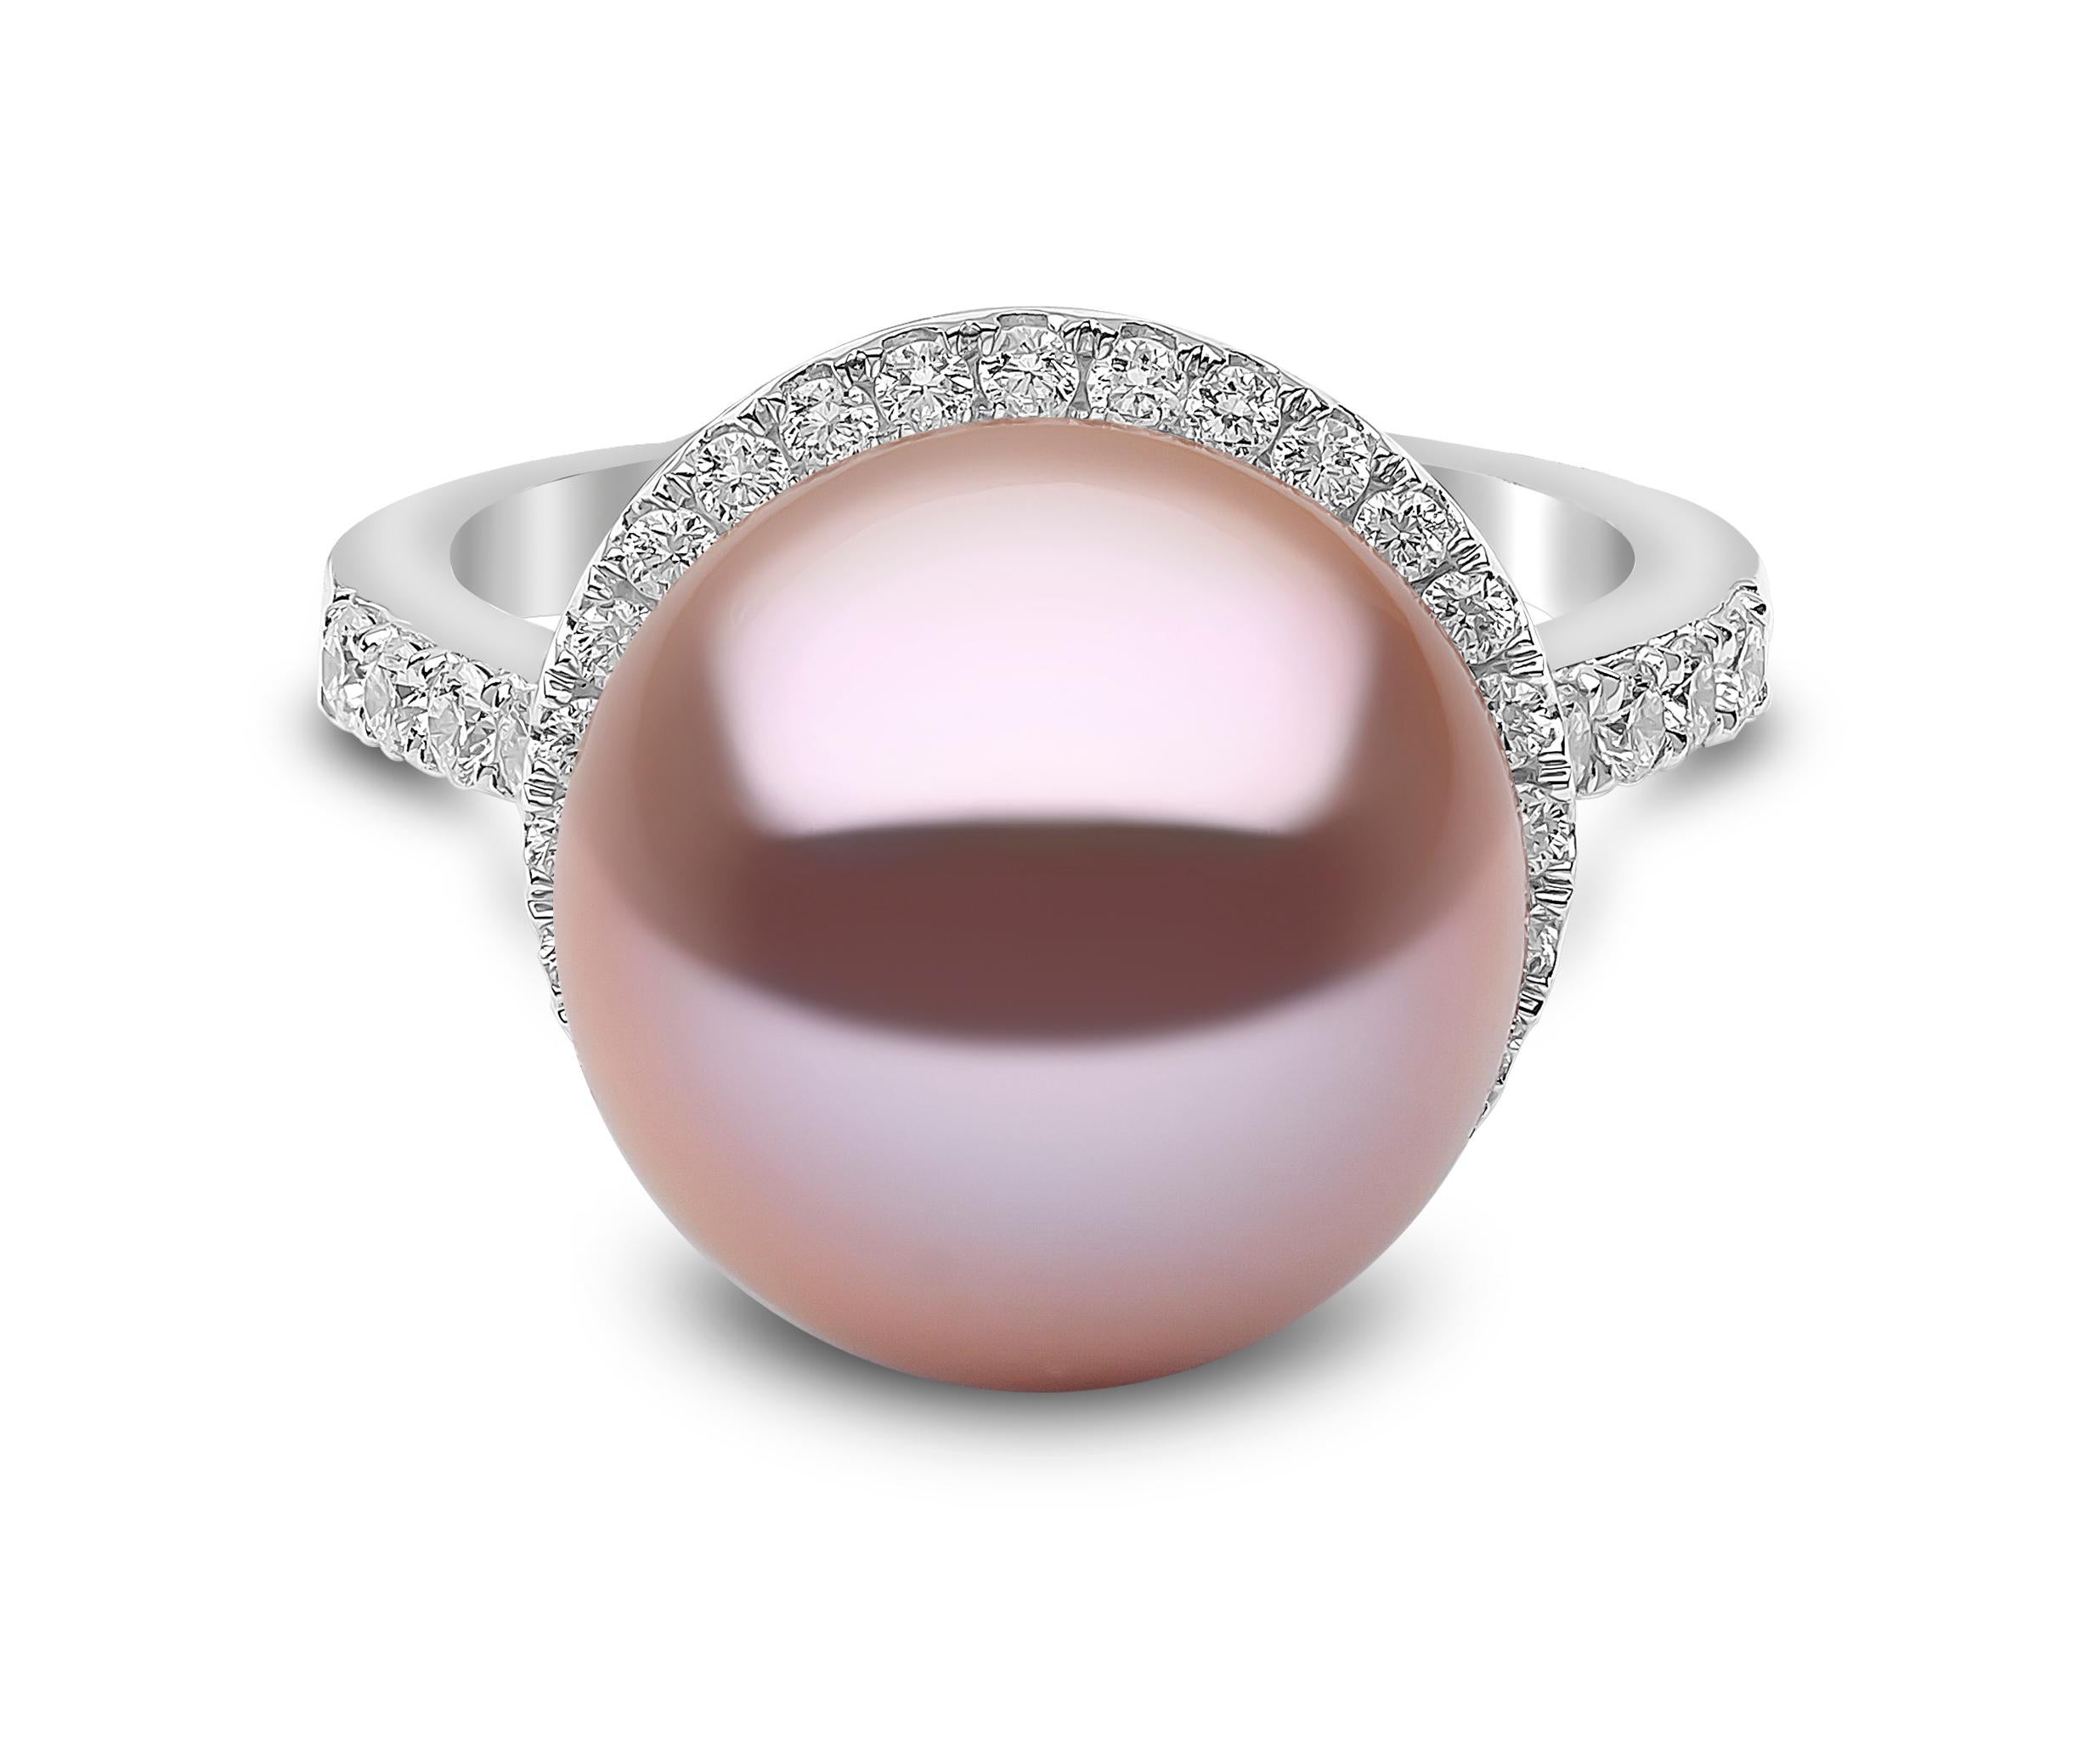 This elegant ring by Yoko London features a lustrous pink Freshwater pearl at its centre, with a delicate diamond halo surrounding it. Set in 18 Karat white gold to enrich the spectacular hues of the pearl and the sparkle of the diamonds, this ring